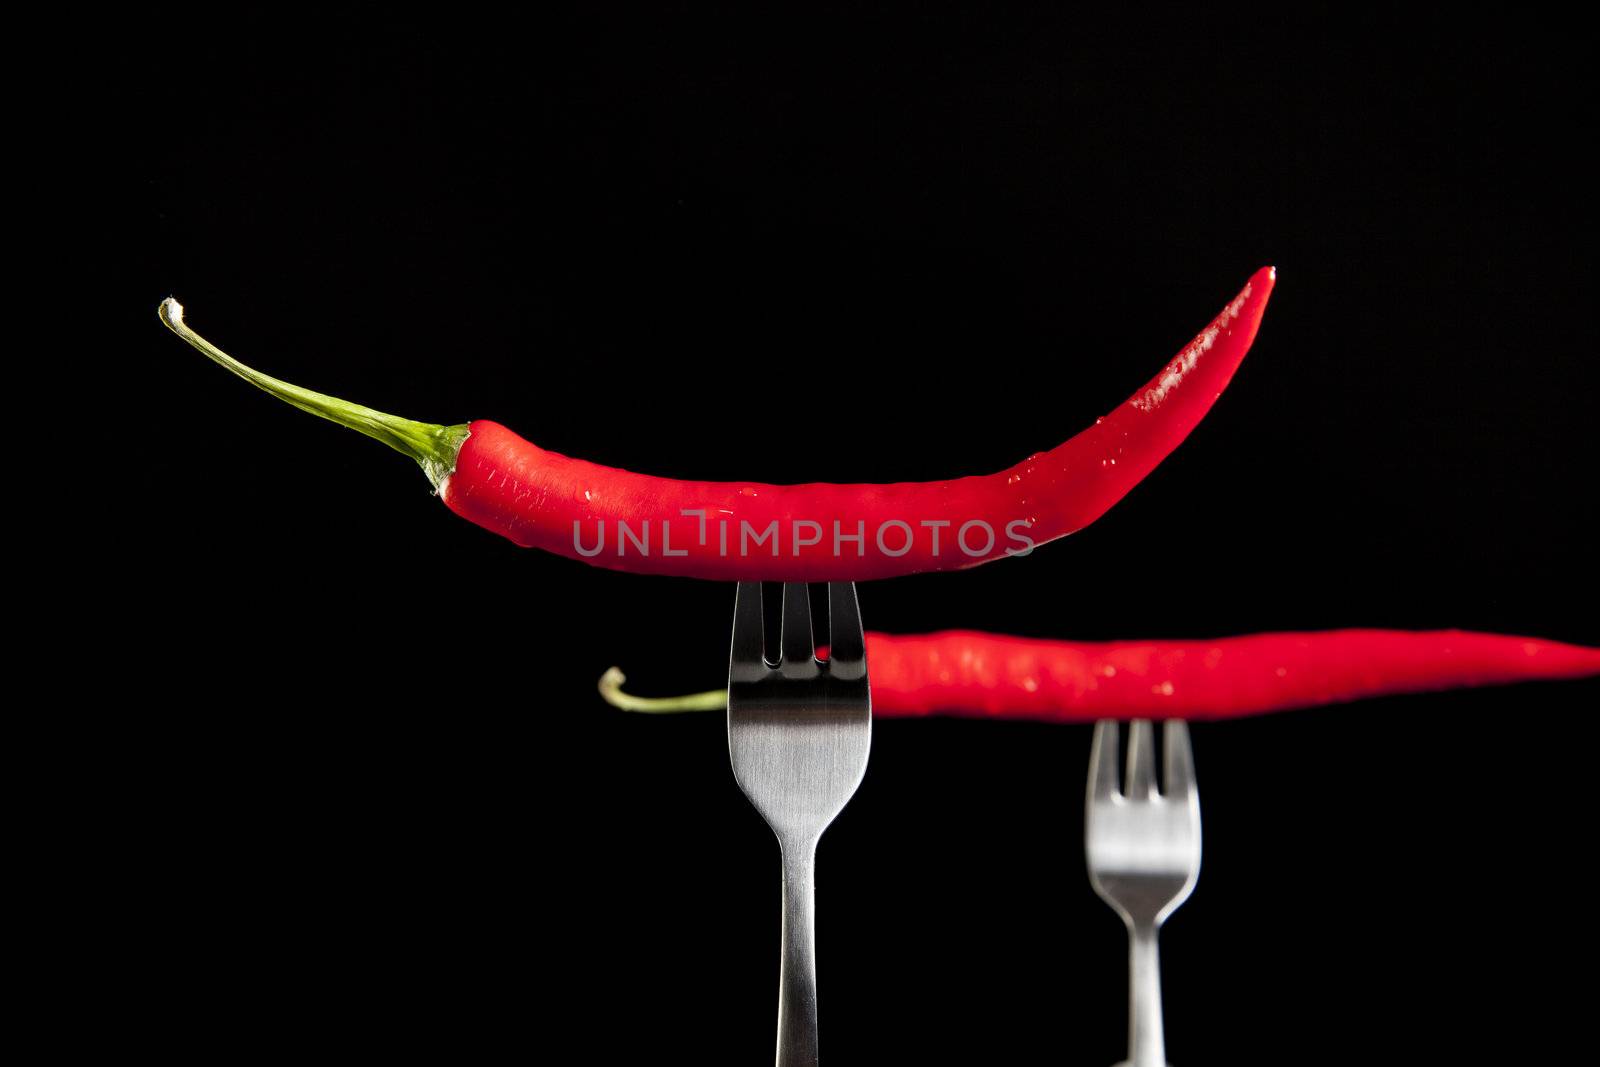 Two hot peppers on forks with black background.